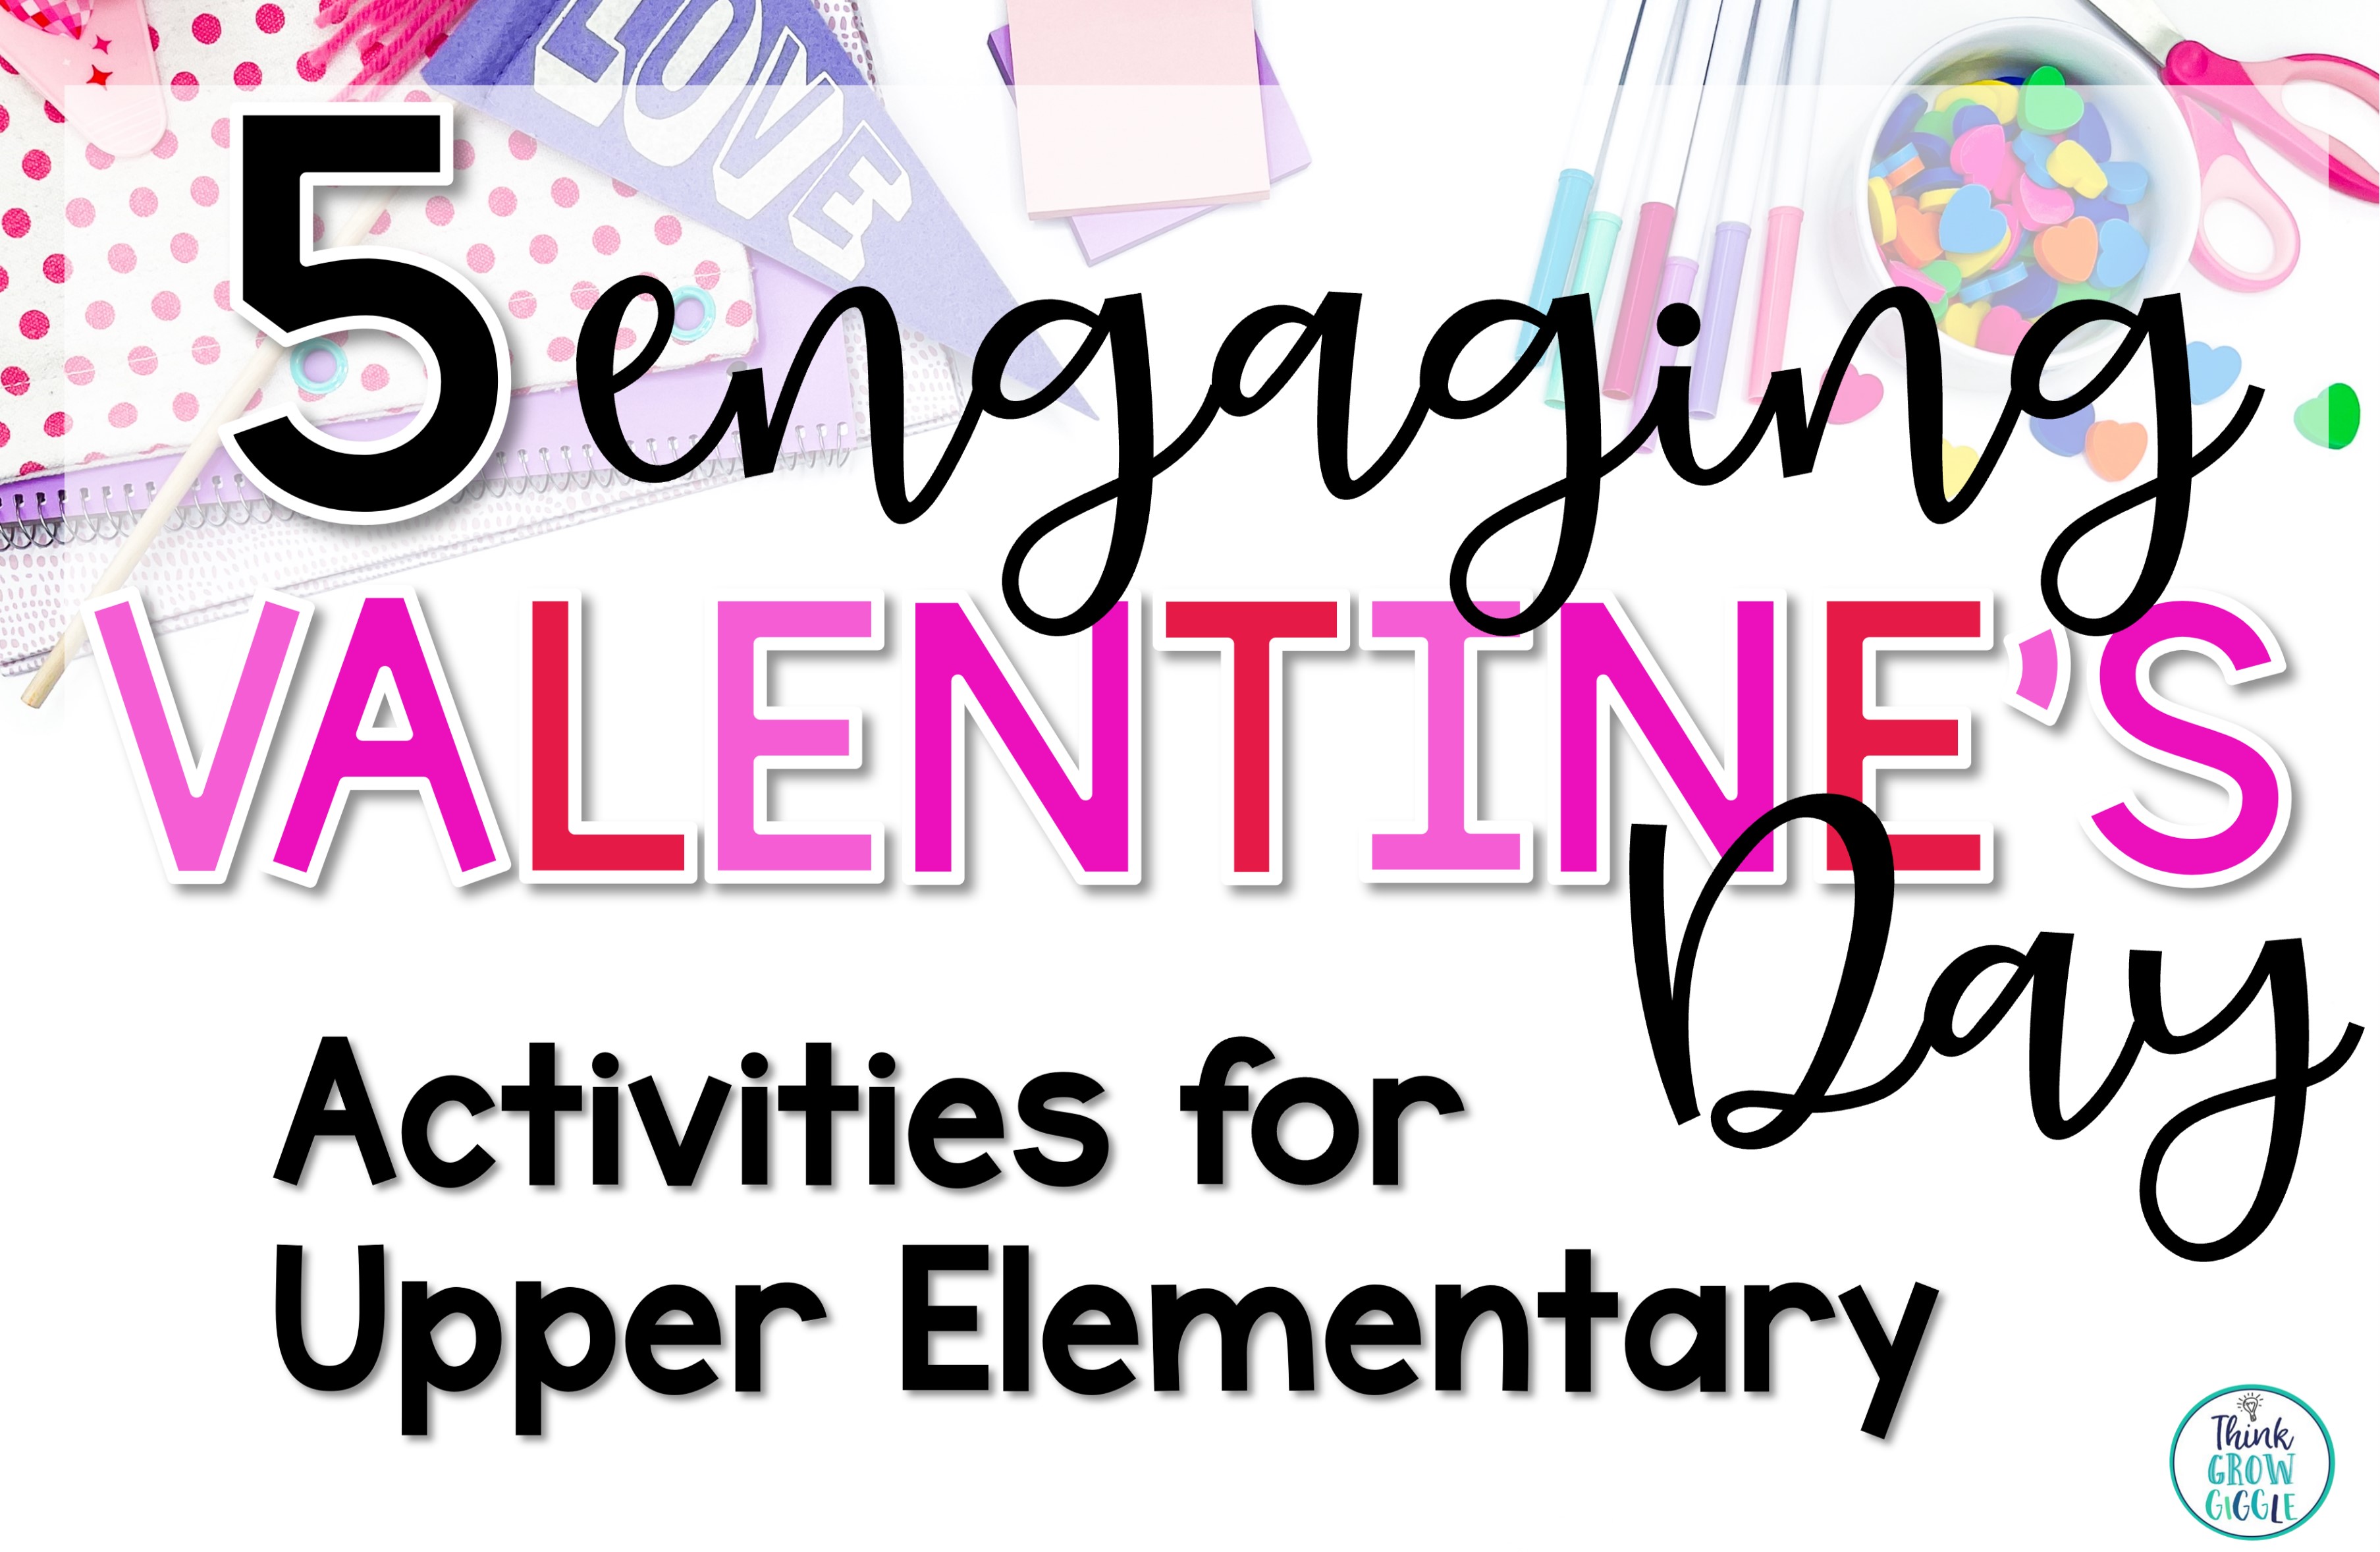 Valentine's Day Activities for Upper Elementary Kids